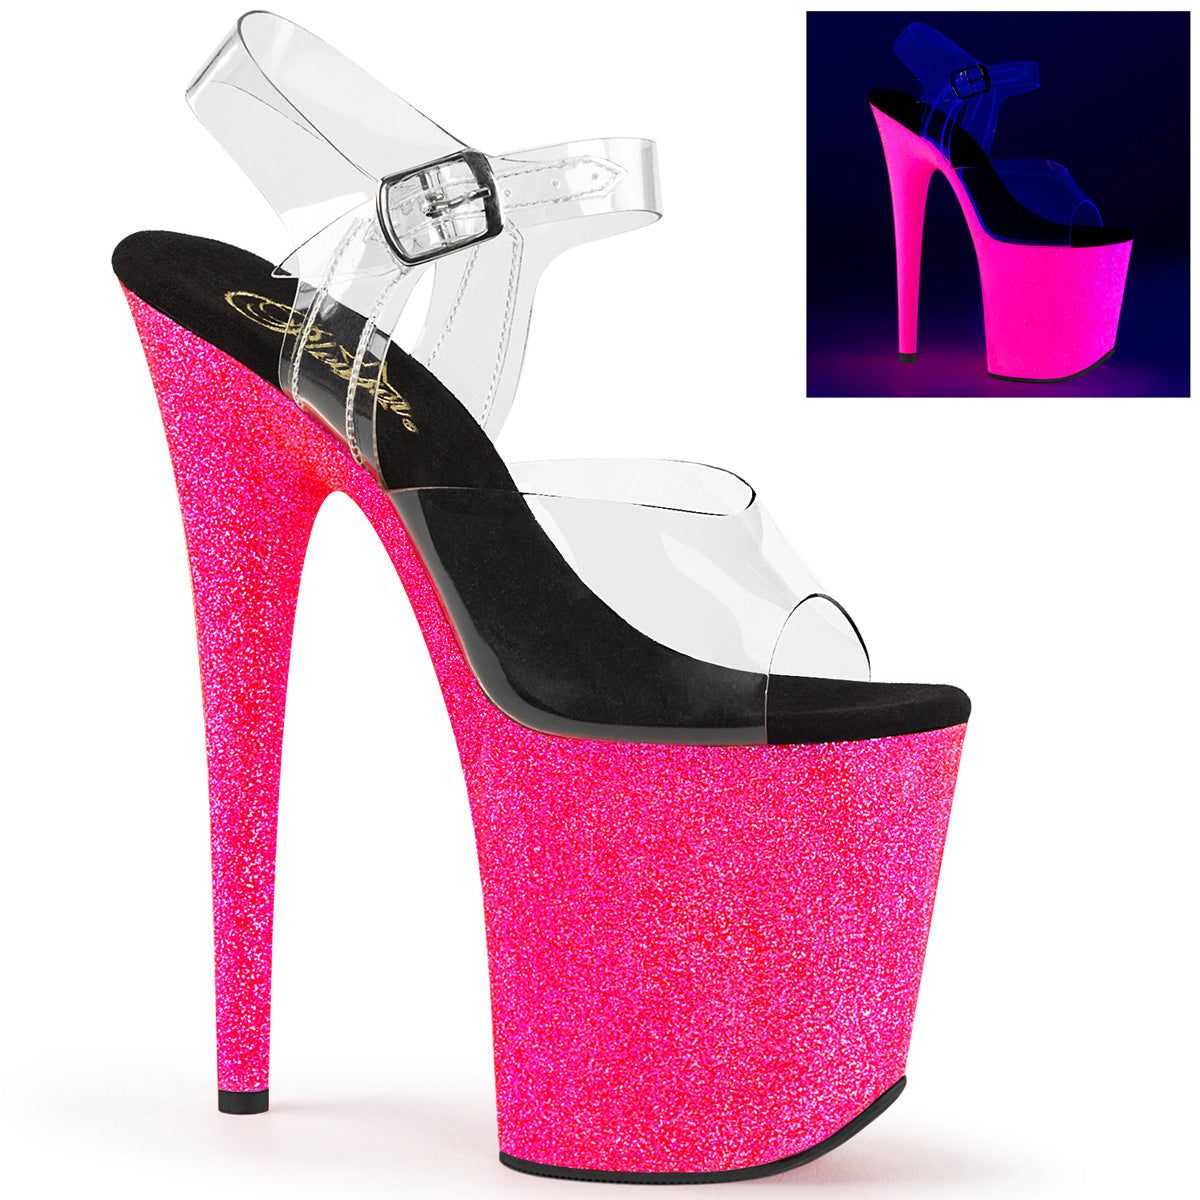 FLAMINGO-808UVG Clear/Neon Hot Pink Glitter